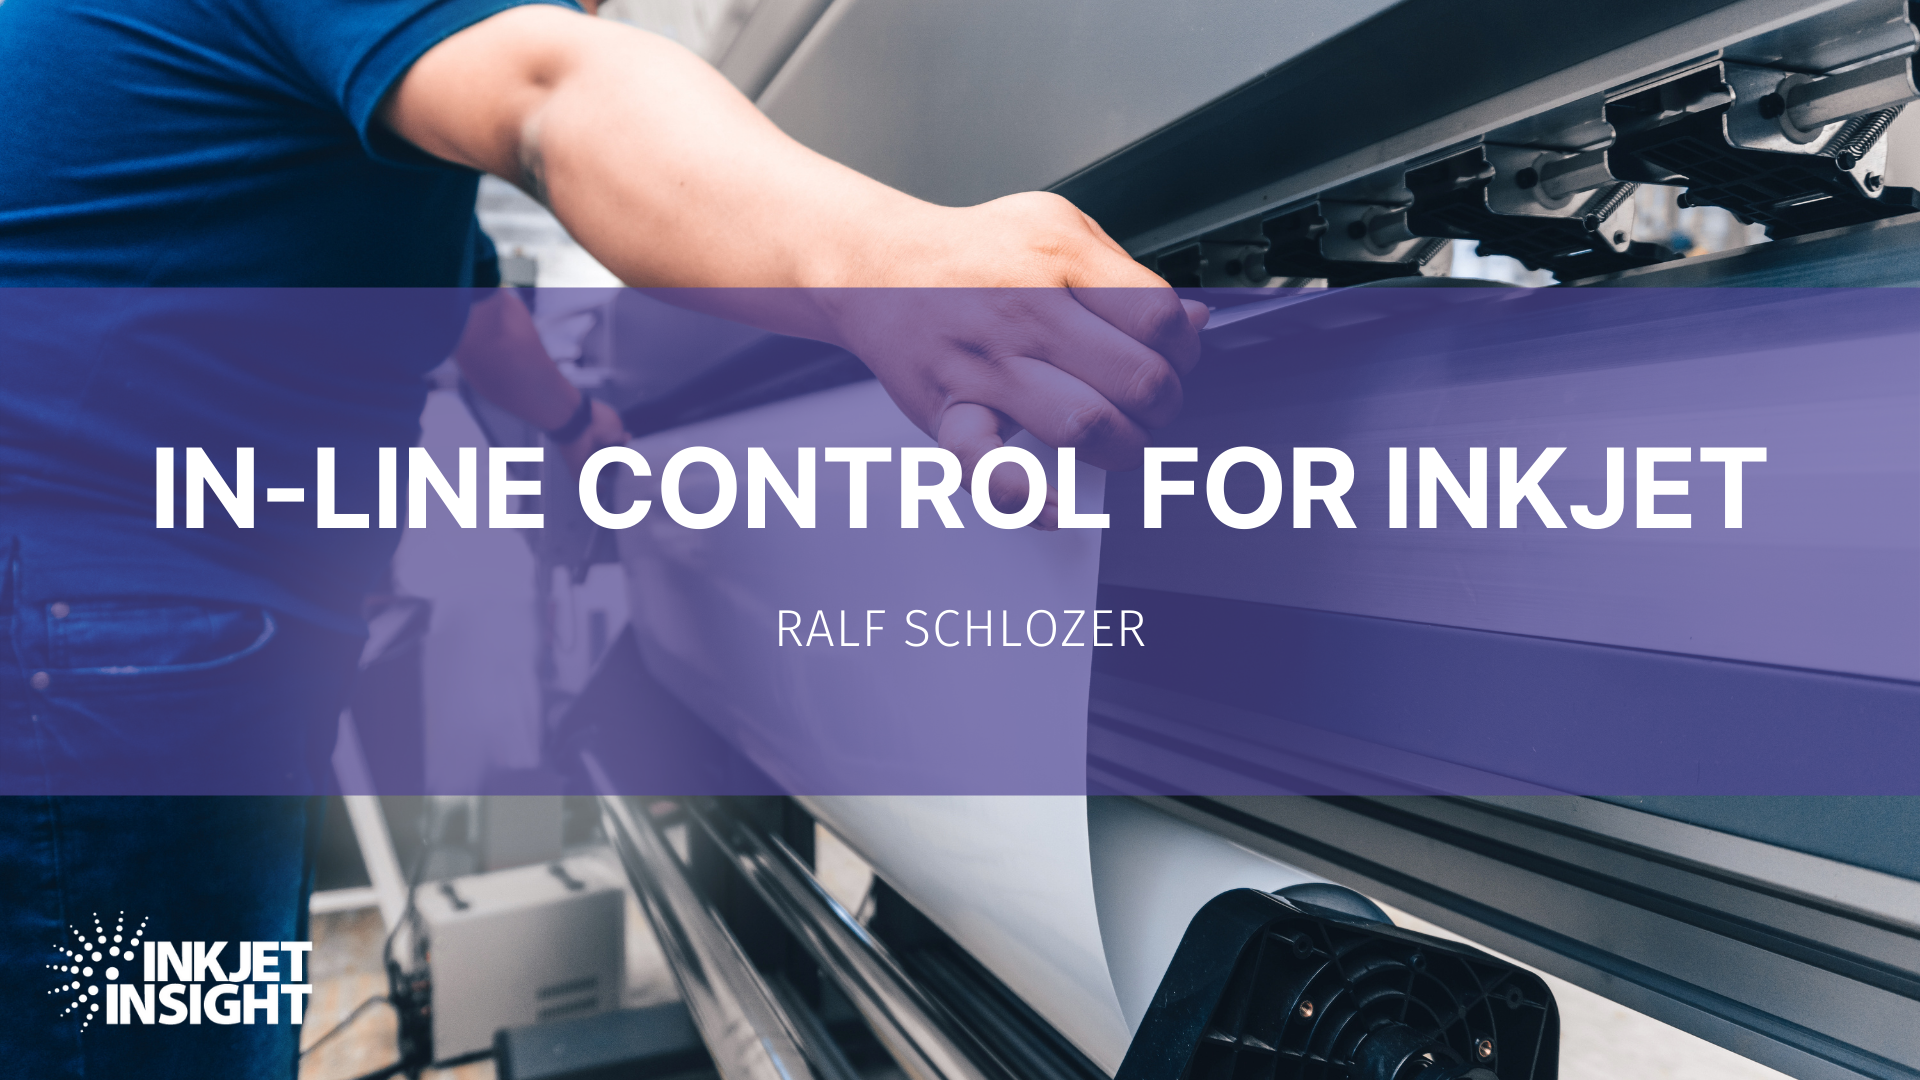 Featured image for “In-Line Control for Inkjet”